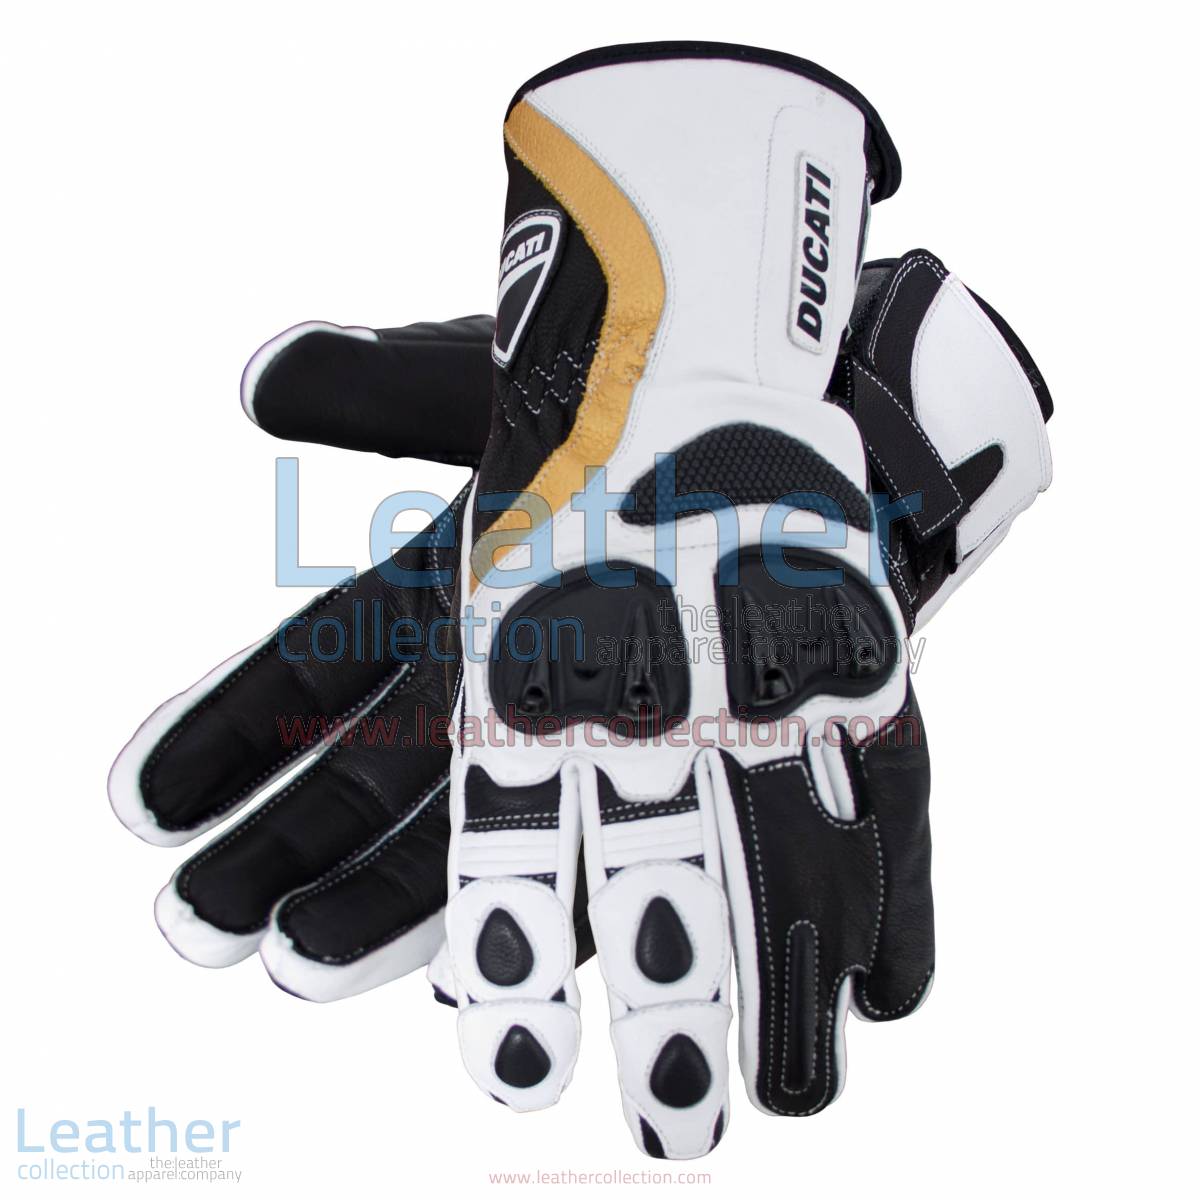 Ducati Motorcycle Leather Gloves